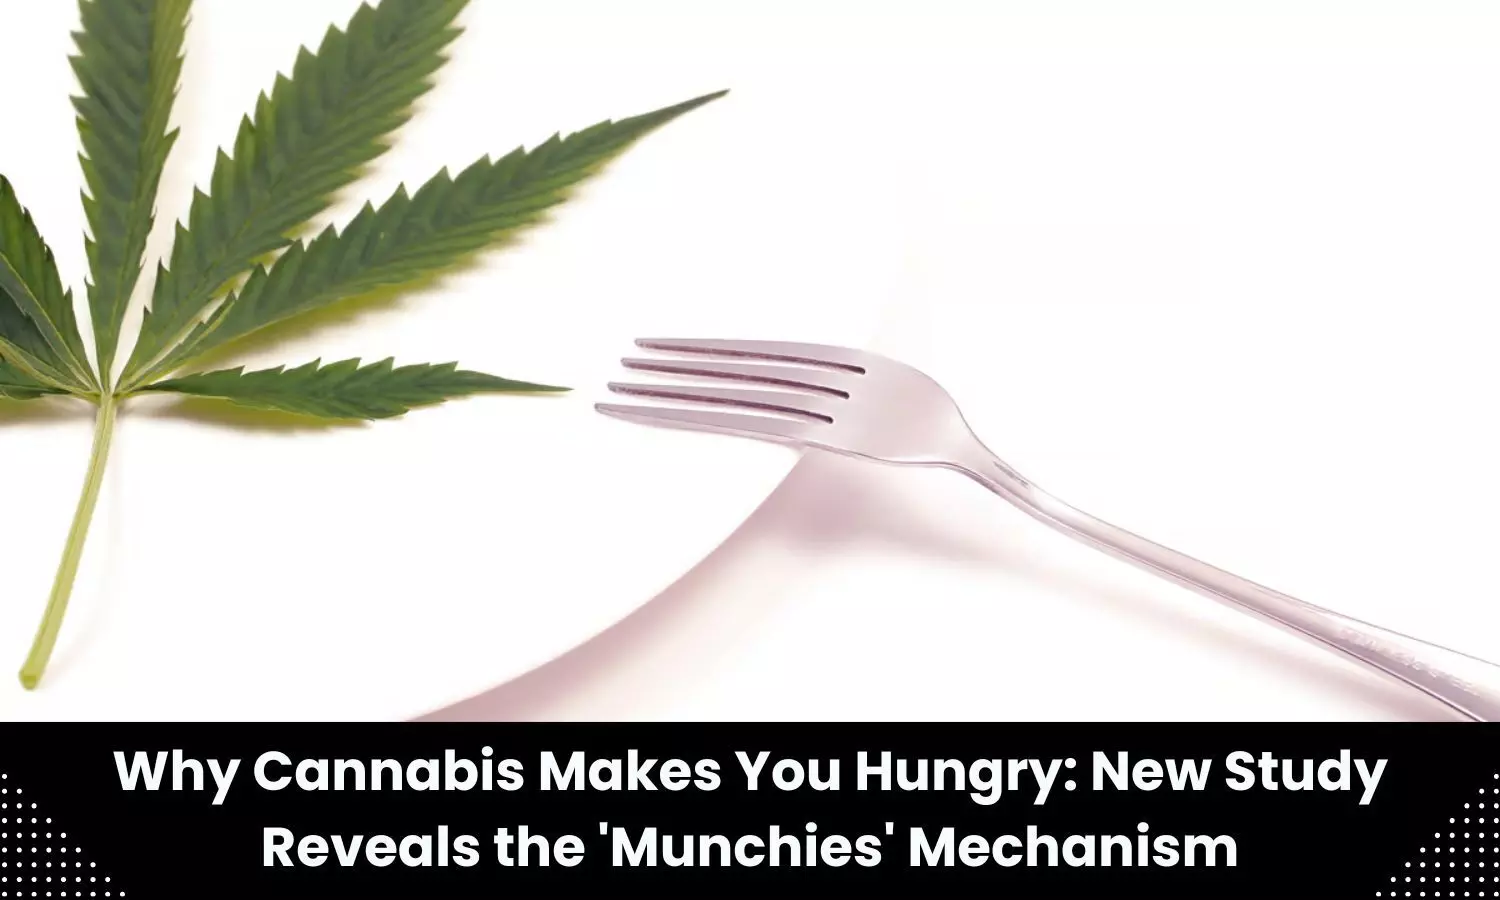 Why cannabis makes you hungry: New study reveals Munchies mechanism